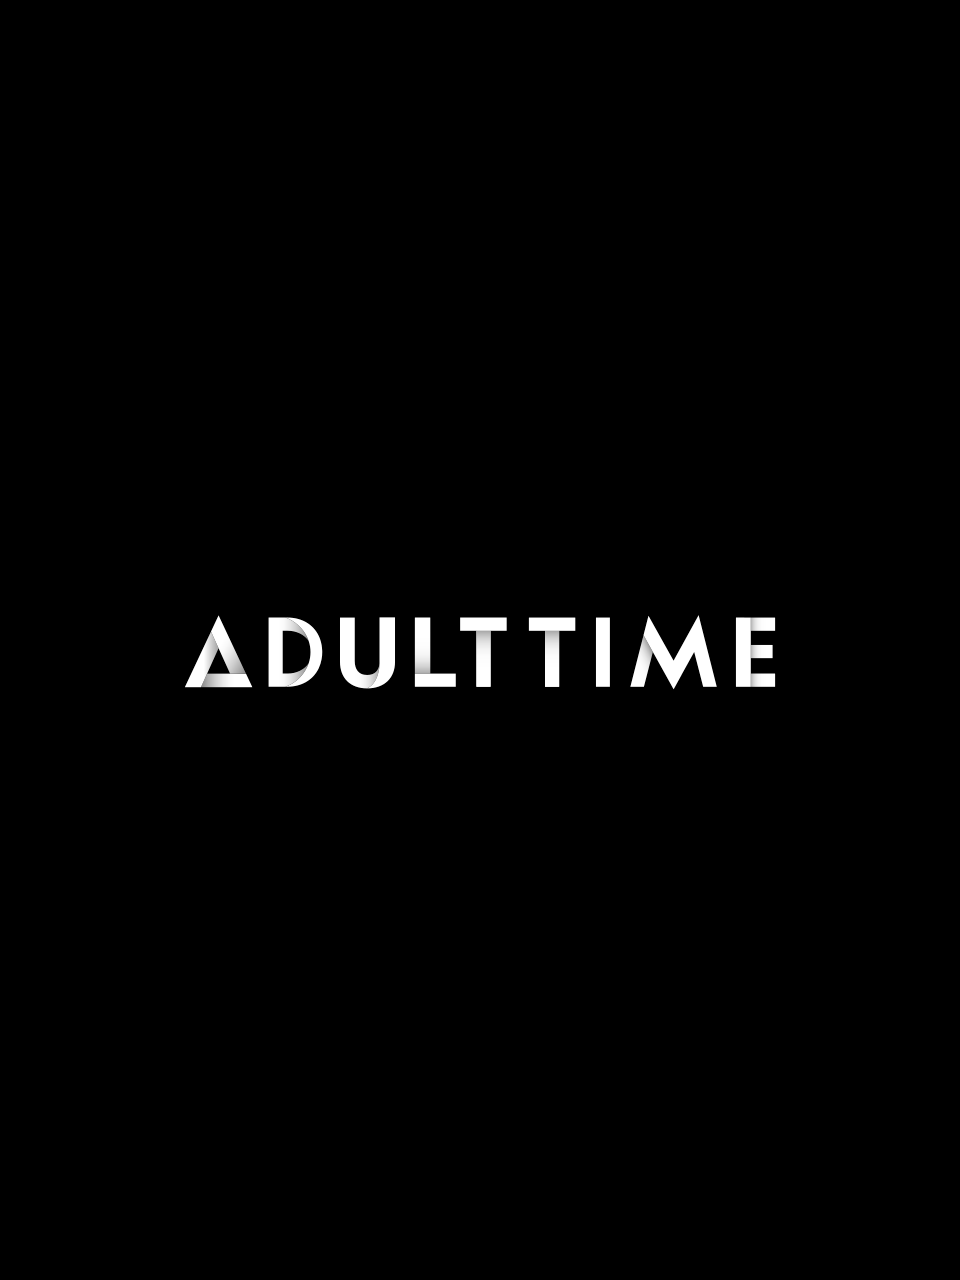 Adult Time